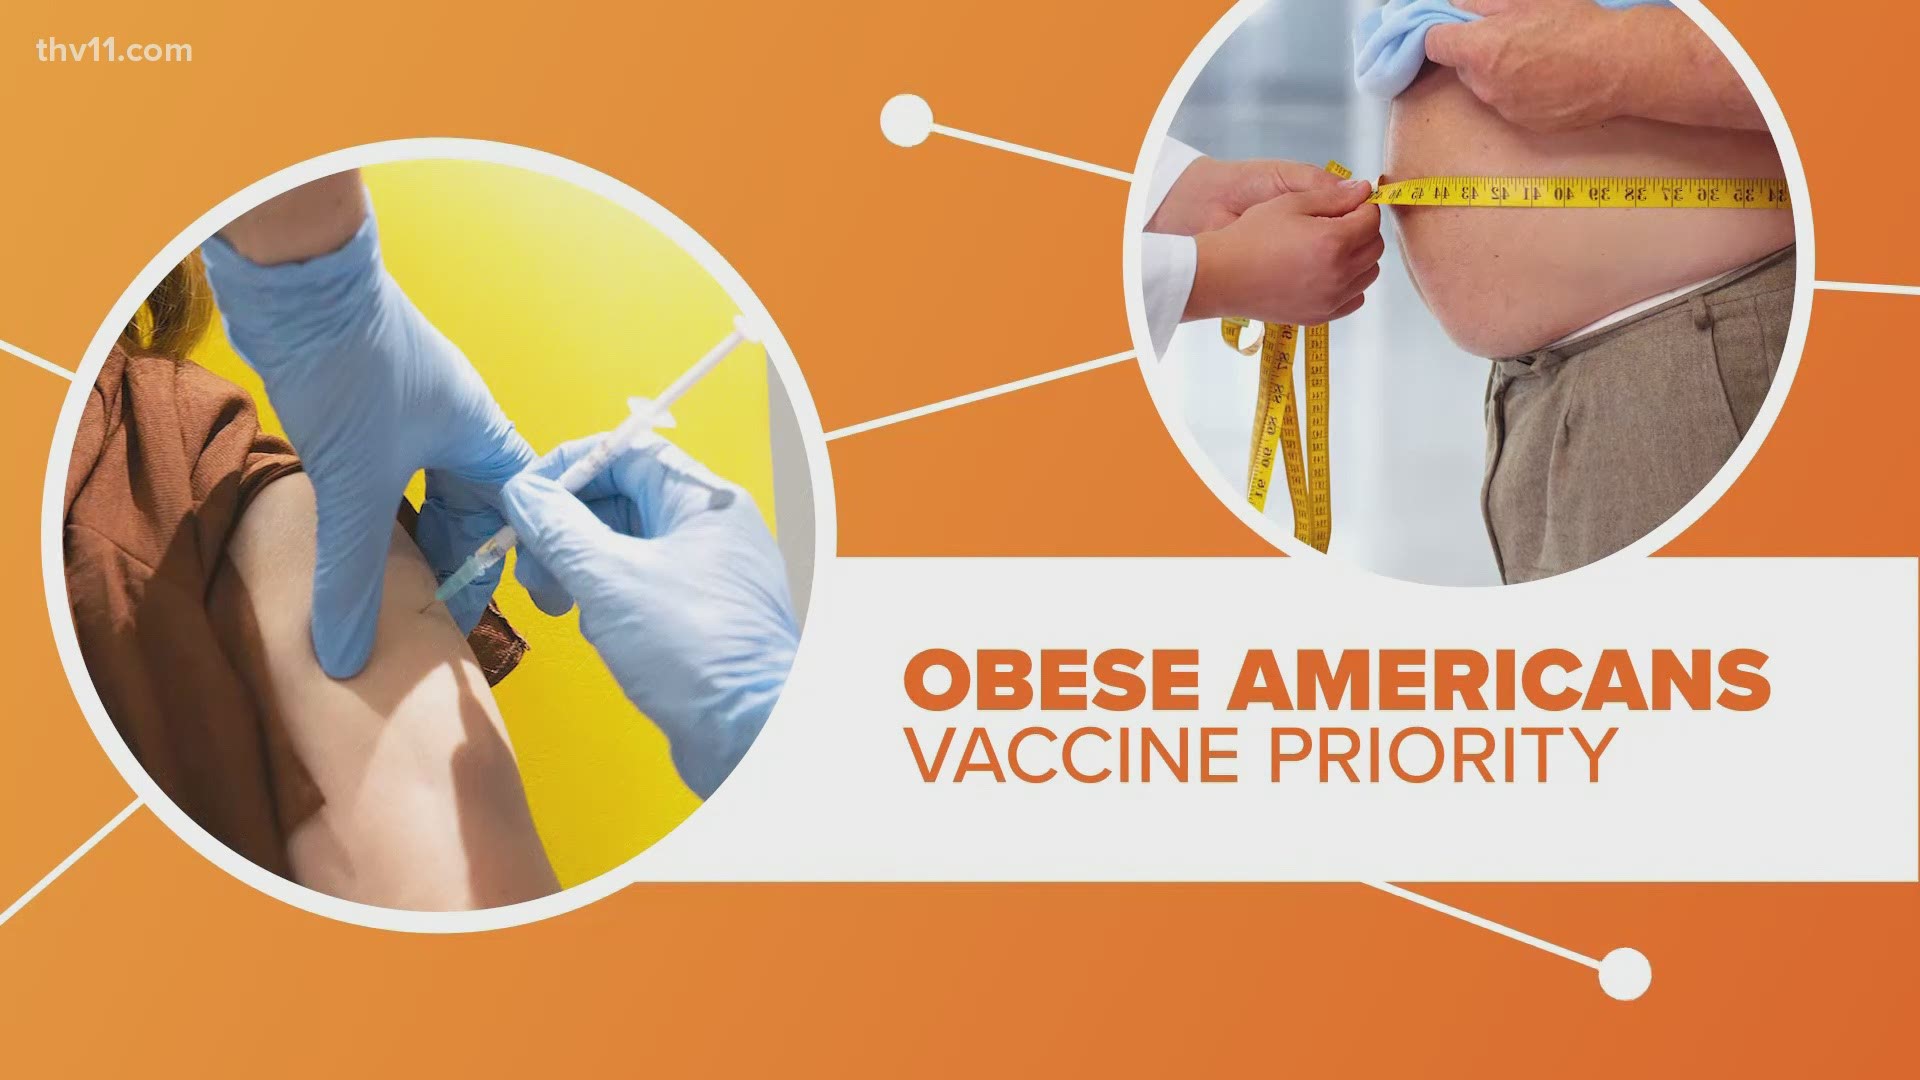 While healthcare workers will get the first doses of the COVID-19 vaccine, later phases of the rollout make go to obese people and others with underlying conditions.